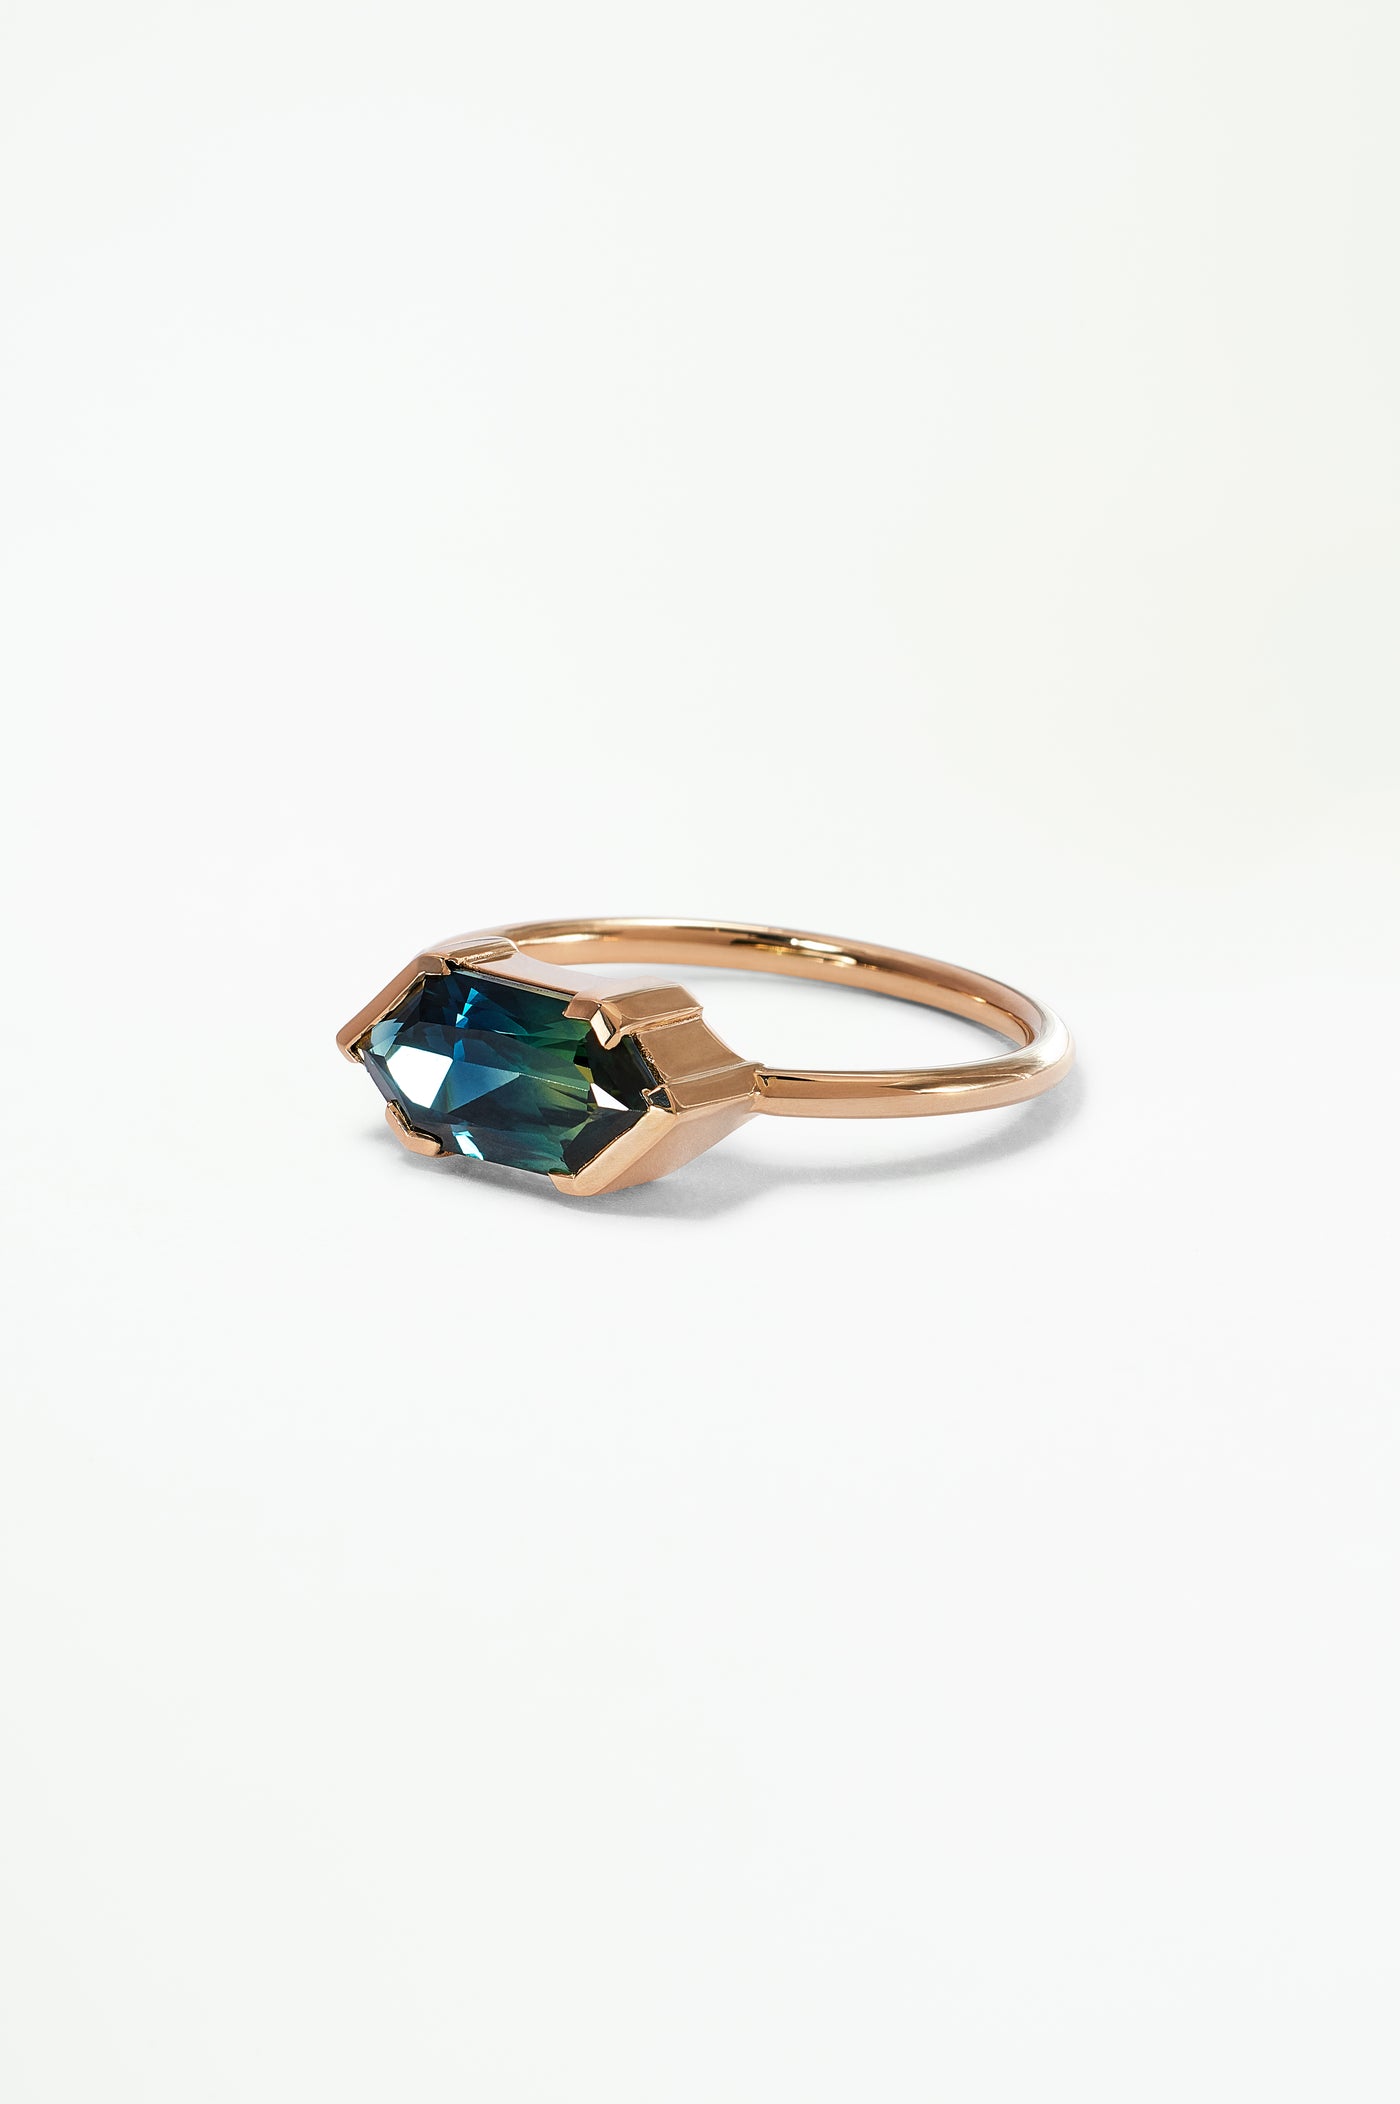 One of a Kind Hexagon Cut Sapphire Solitaire Ring No. 1